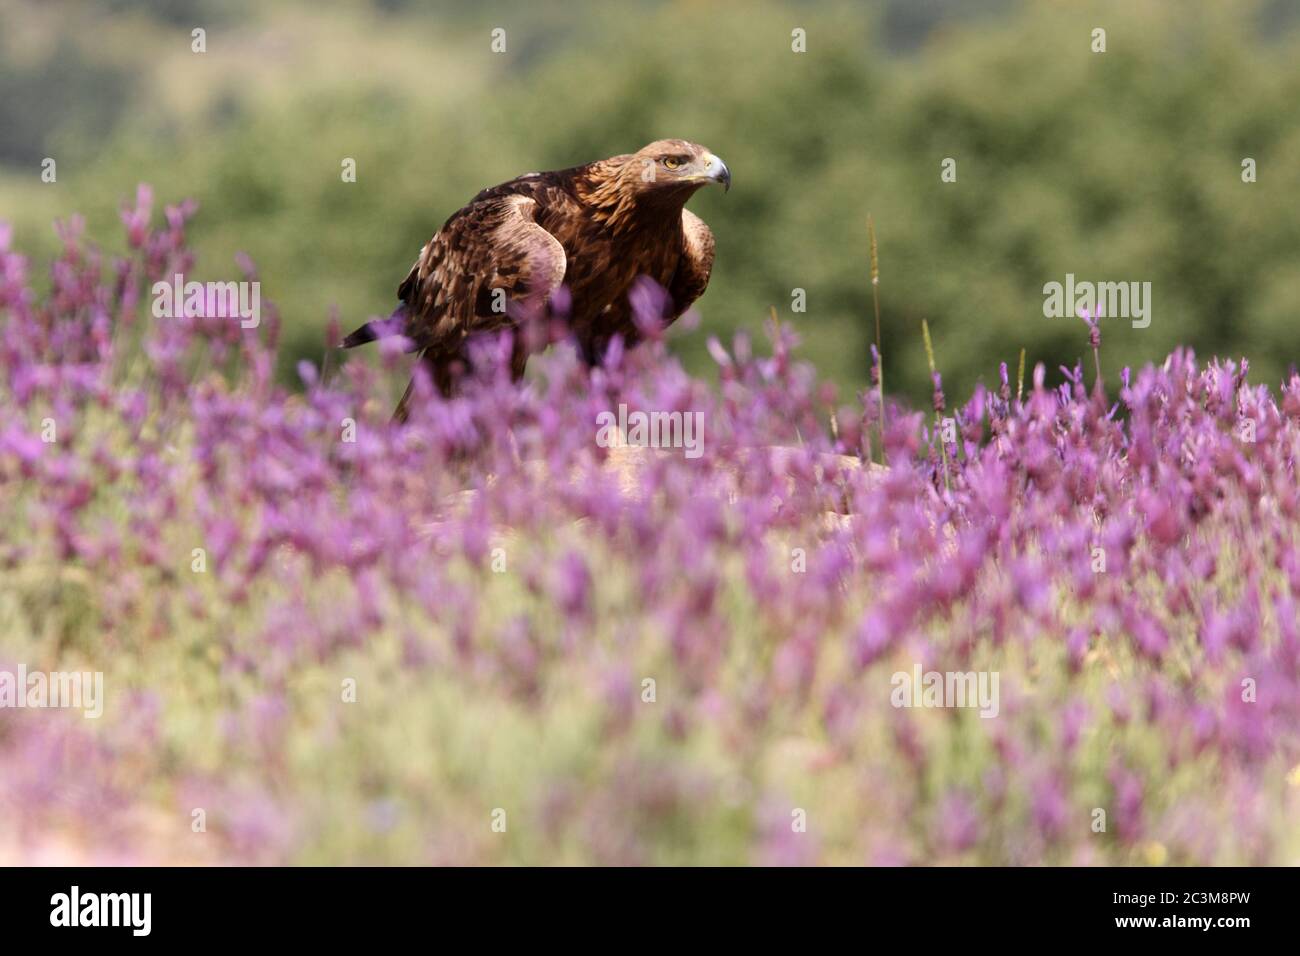 Golden eagle among purple flowers with the first light of day Stock Photo